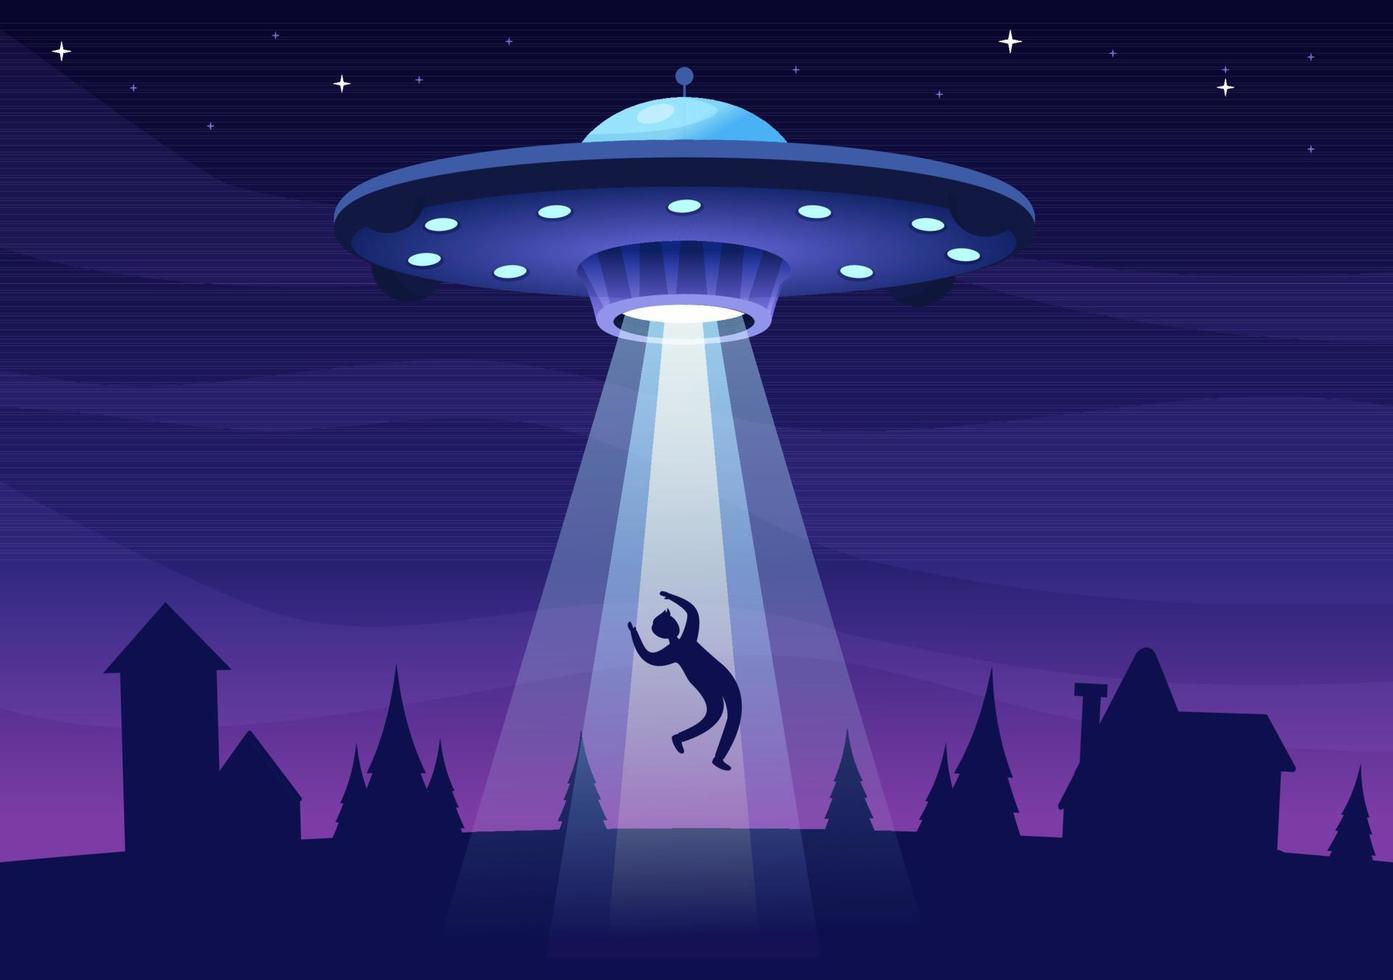 UFO Flying Spaceship with Flying Saucer Over the City Sky Abducts Human or Animals in Flat Cartoon Hand Drawn Templates Illustration vector